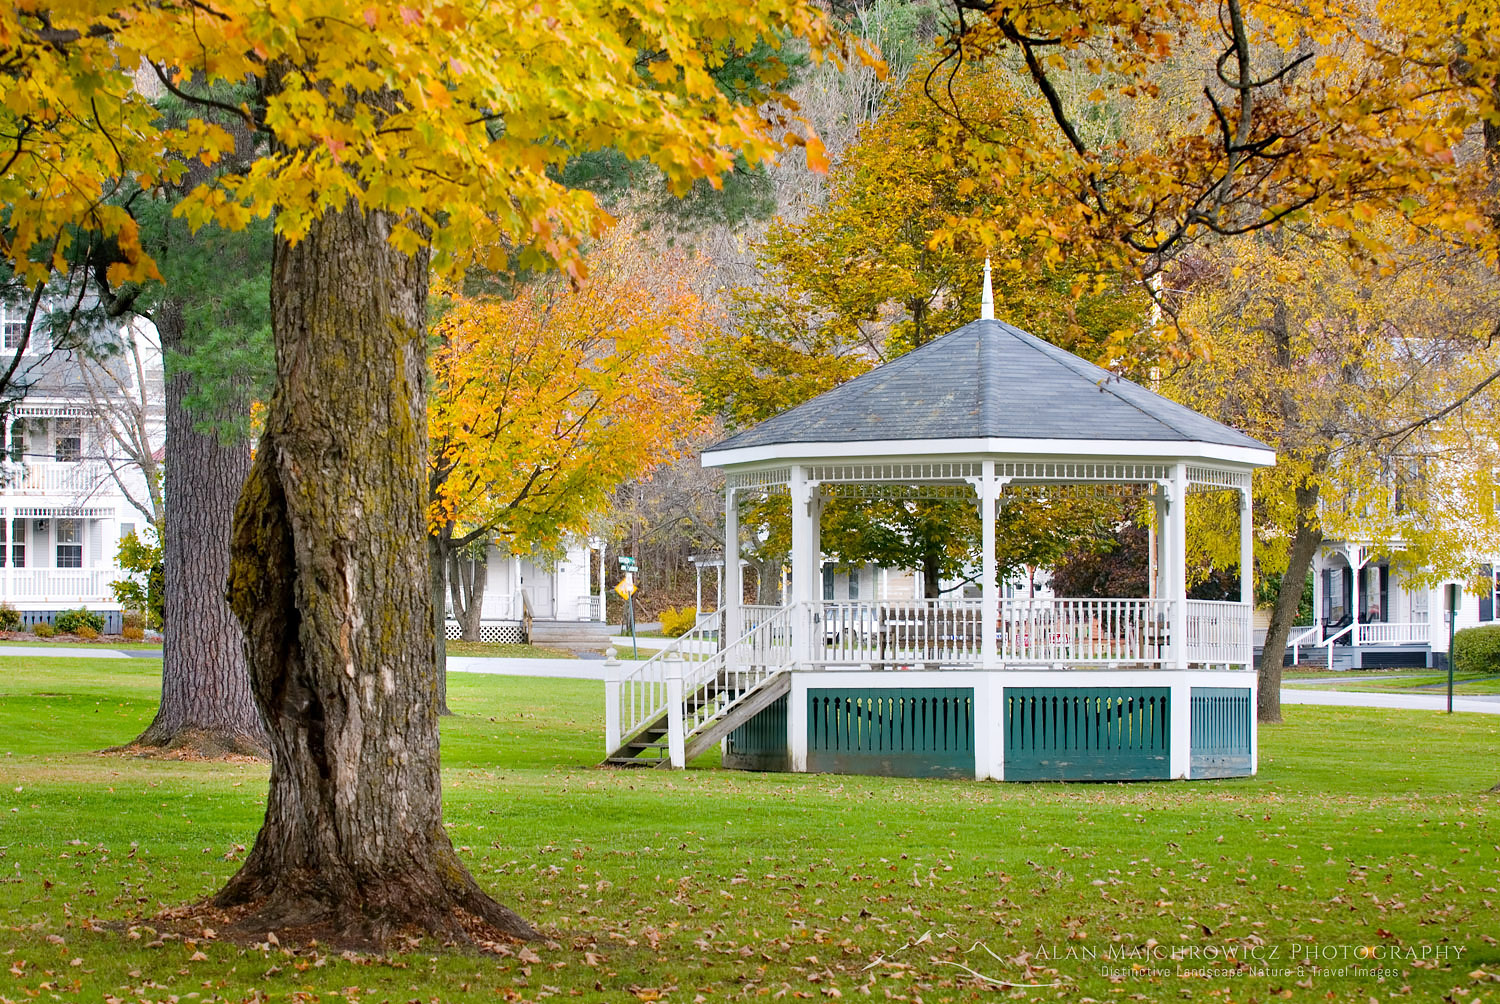 Bandstand in the village green of Rochester Vermont #7934